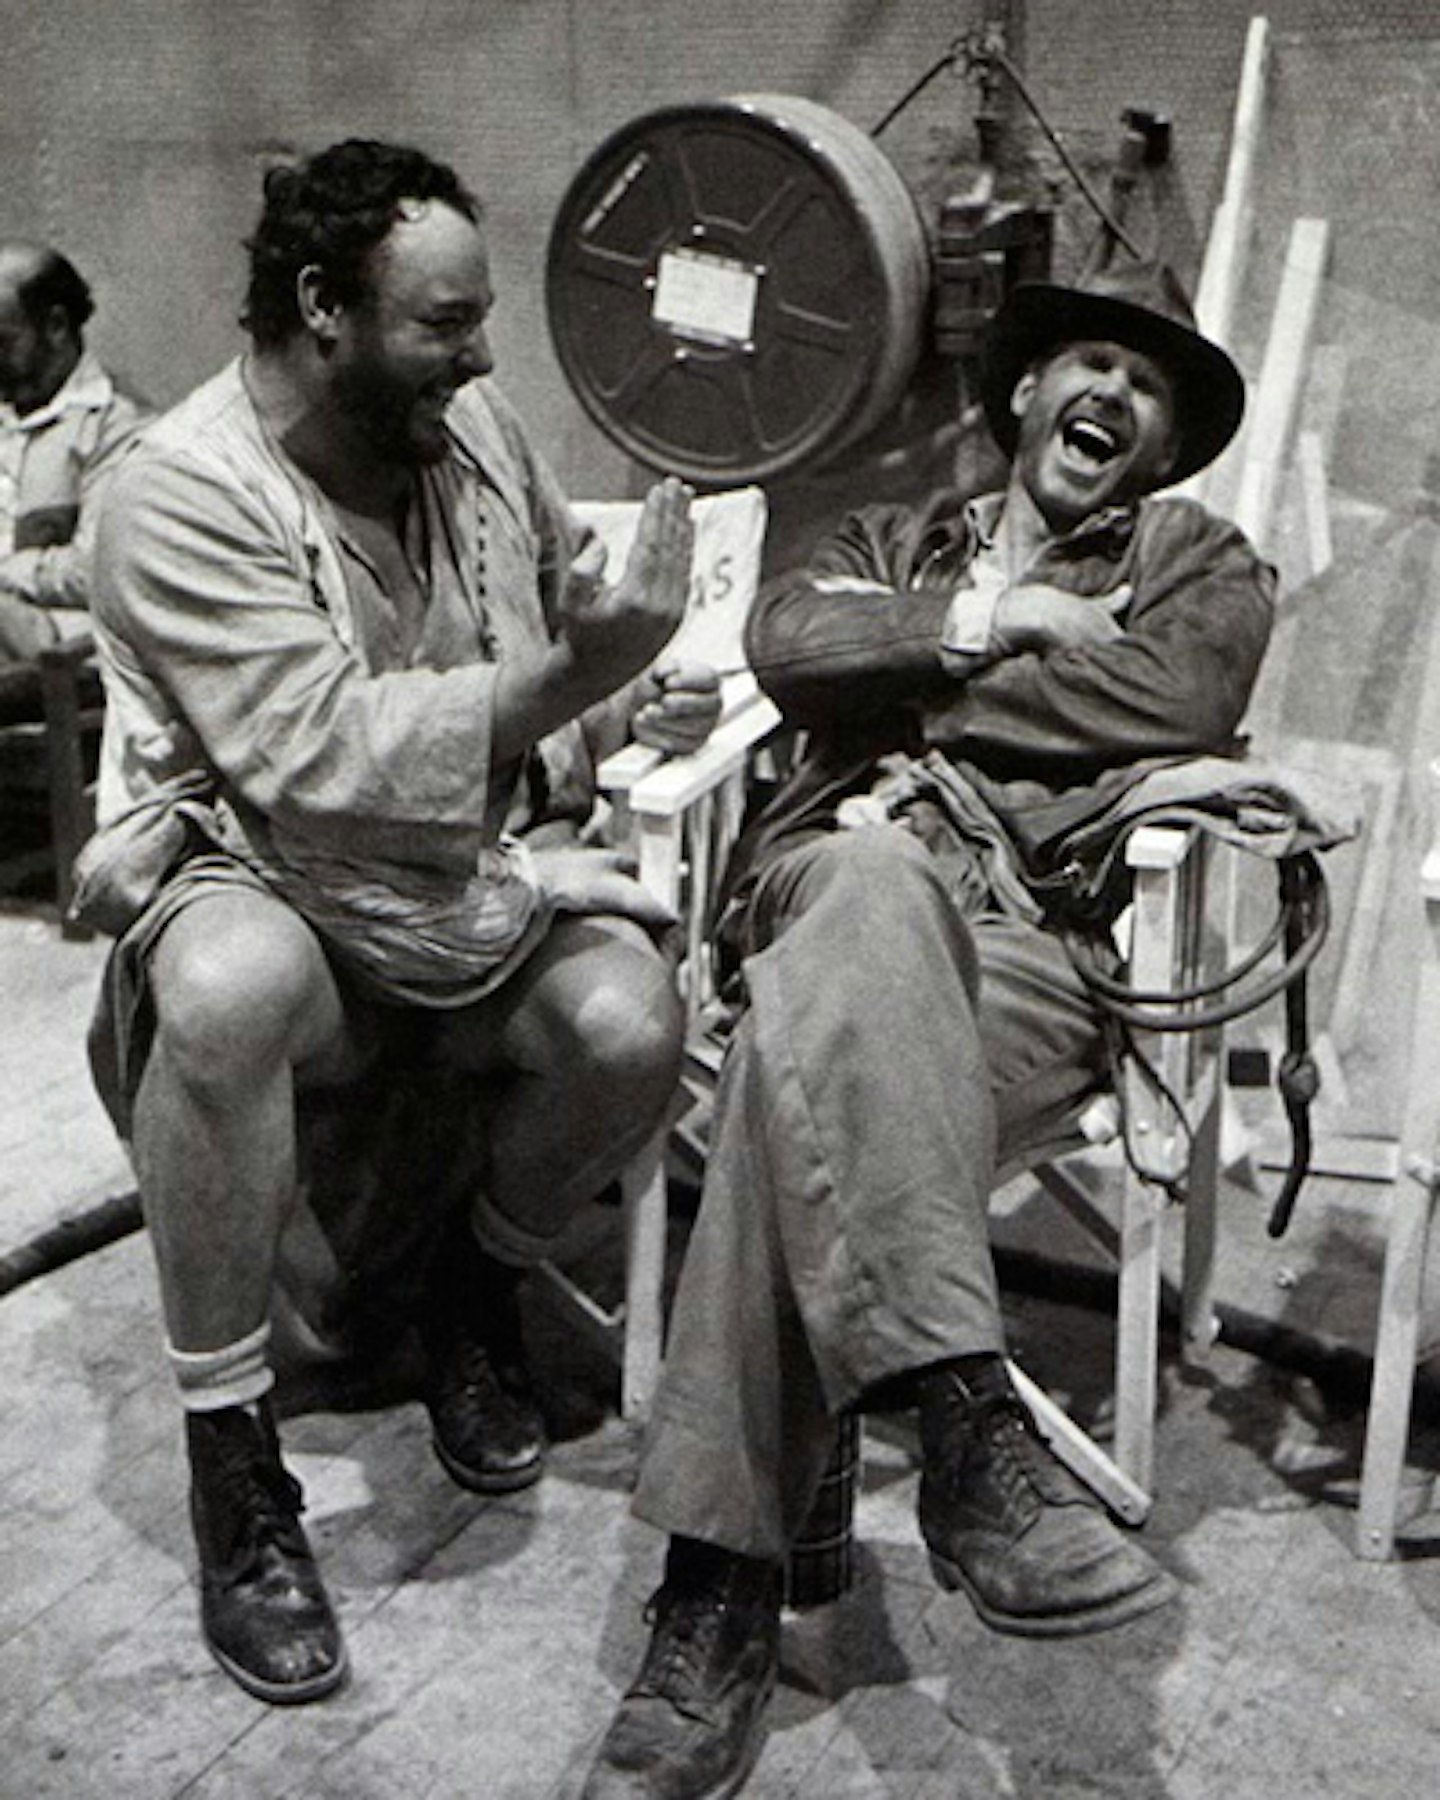 Harrison Ford and John Ryhs-Davies on the set of Raiders Of The Lost Ark